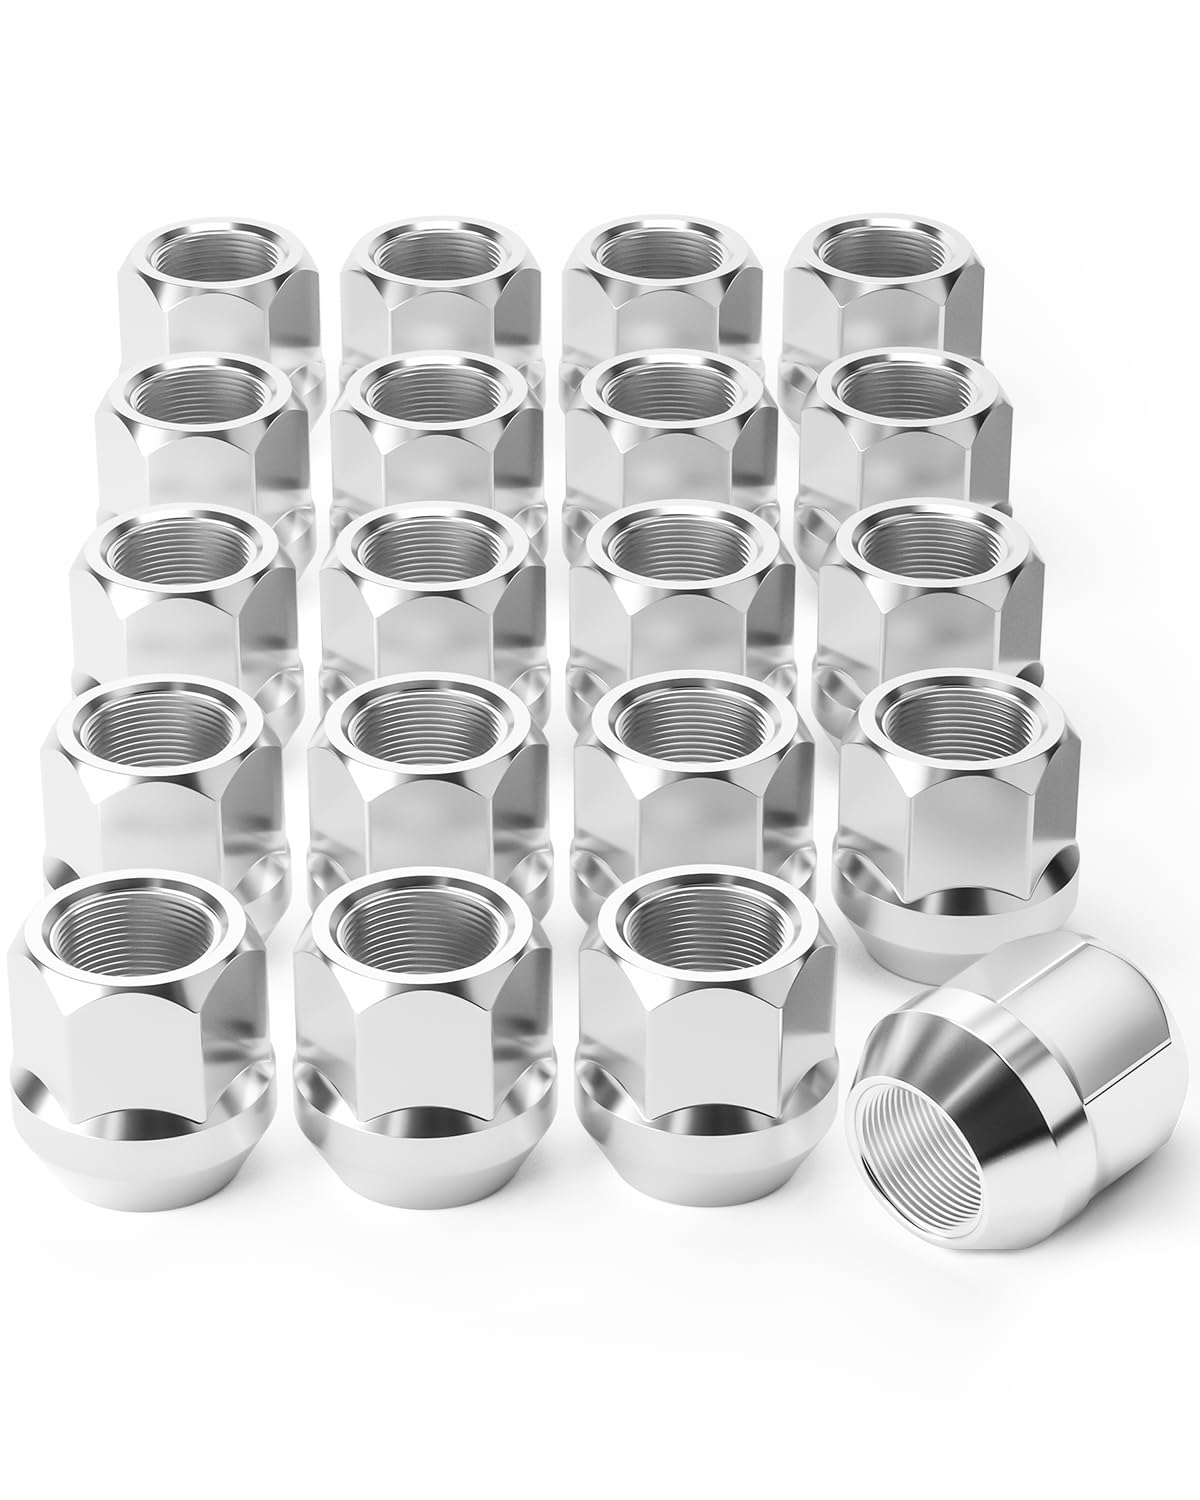 Orion Motor Tech 1/2"-20 Open End Lug Nuts, 3/4" 19mm Hex 0.84x0.9 in. Chrome Plated Wheel Lug Nuts Compatible with Dodge Dakota Ramcharger Ford Bronco Explorer F-150 Jeep Wrangler, Set of 20